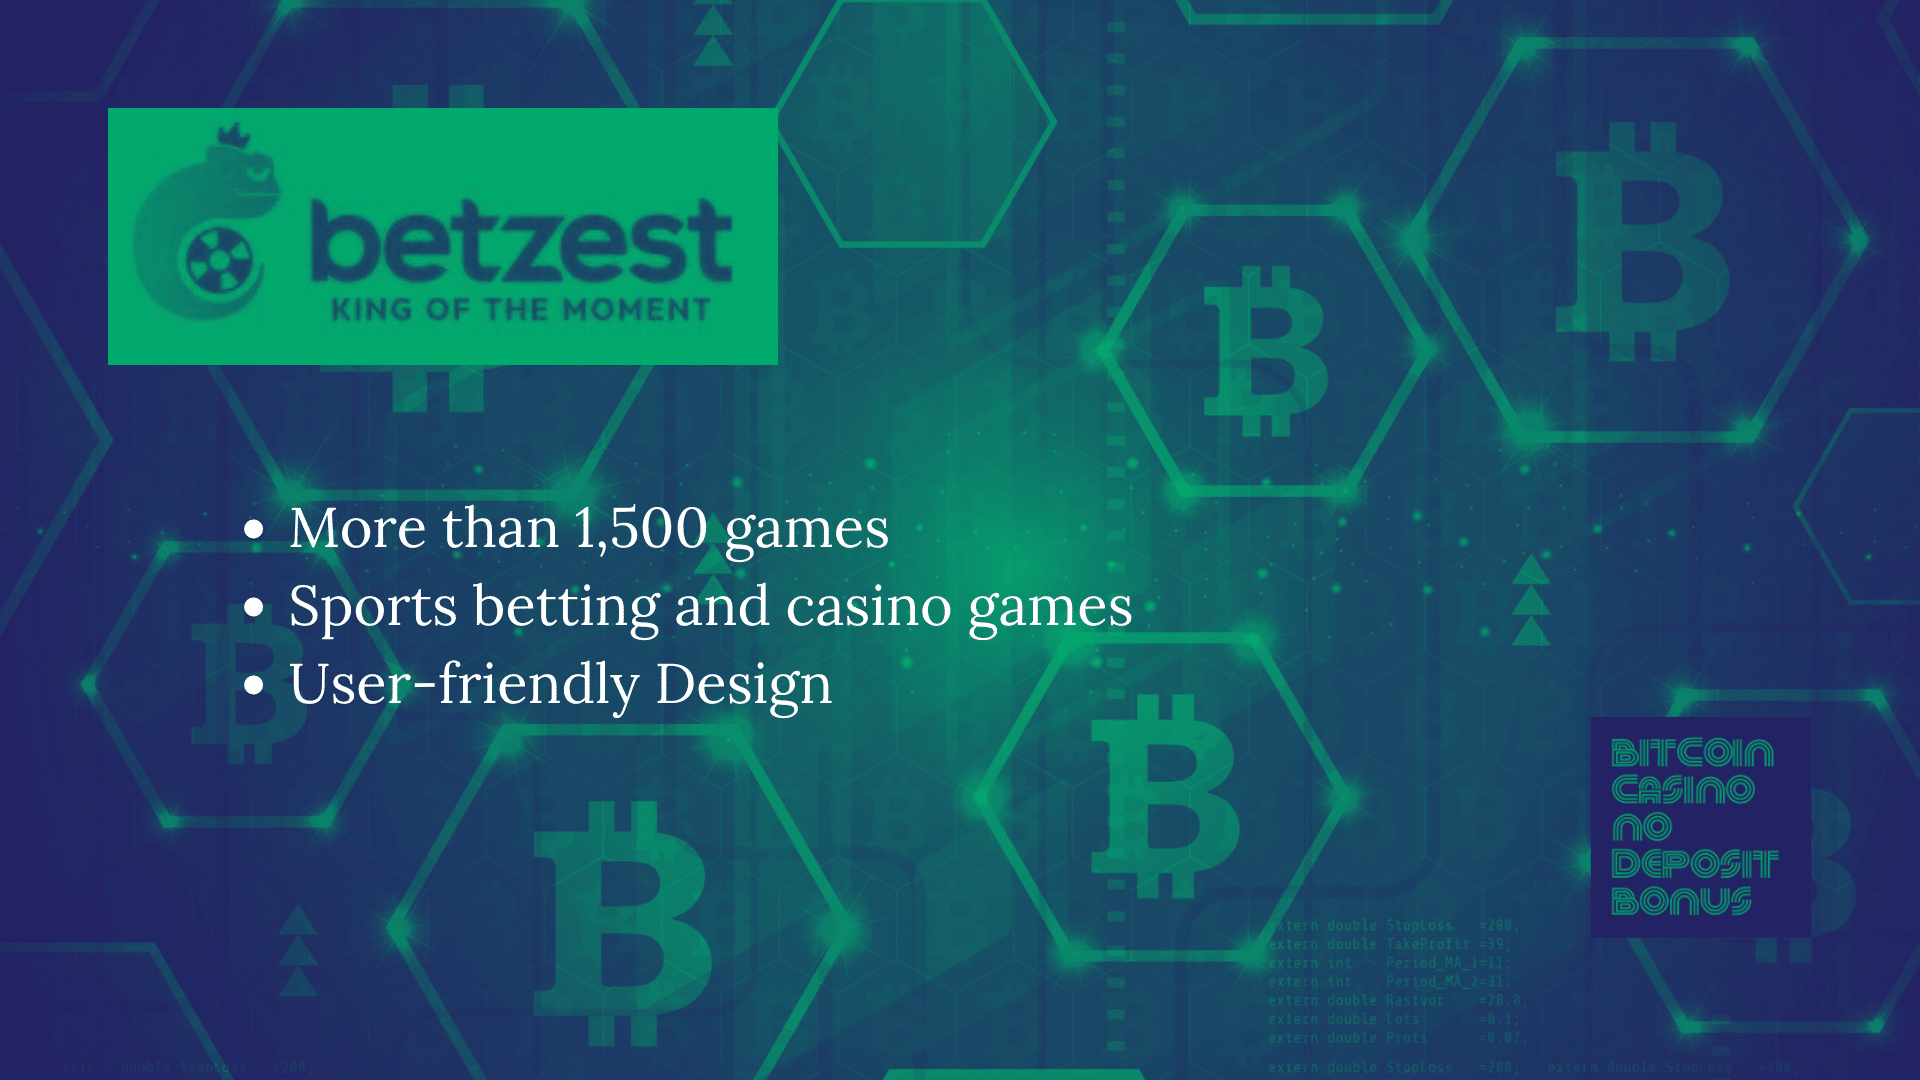 You are currently viewing Betzest Casino Promo Codes – Betzest.com Free Bonus June 2022